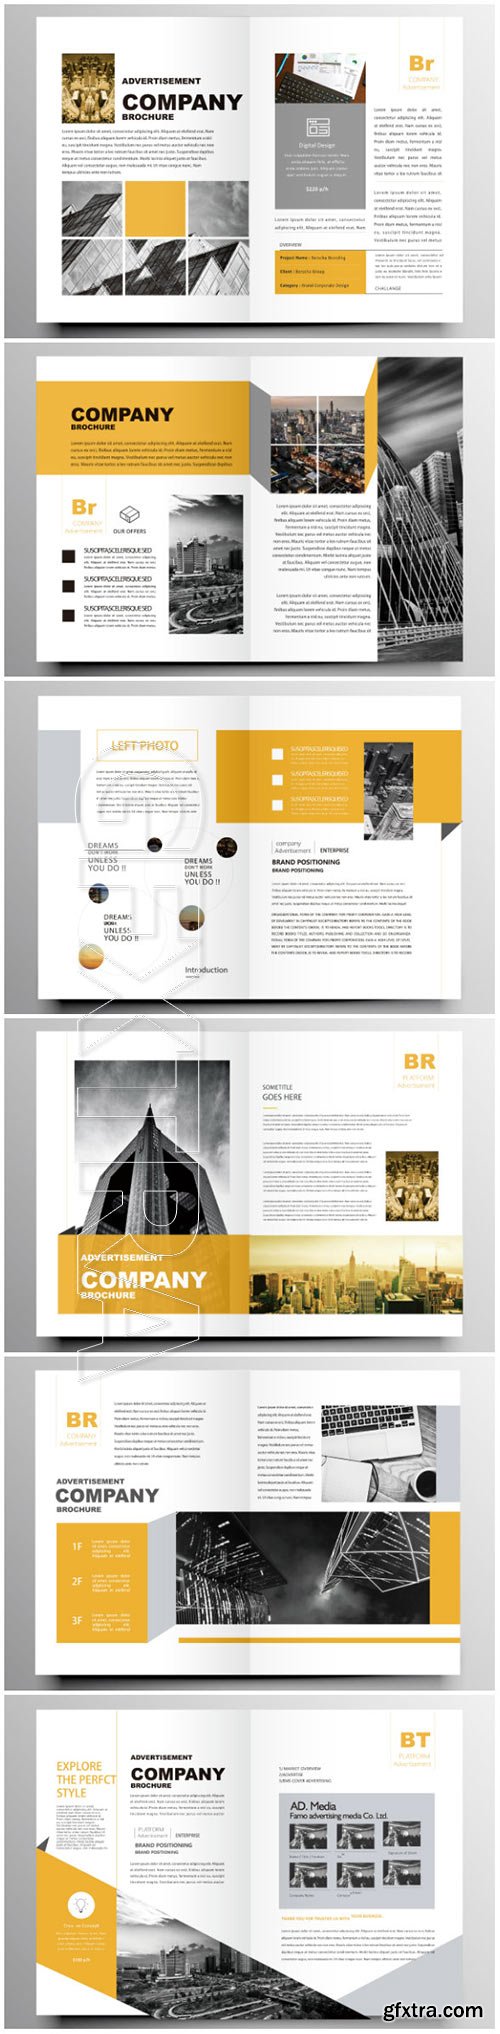 Brochure template vector layout design, corporate business annual report, magazine, flyer mockup # 198